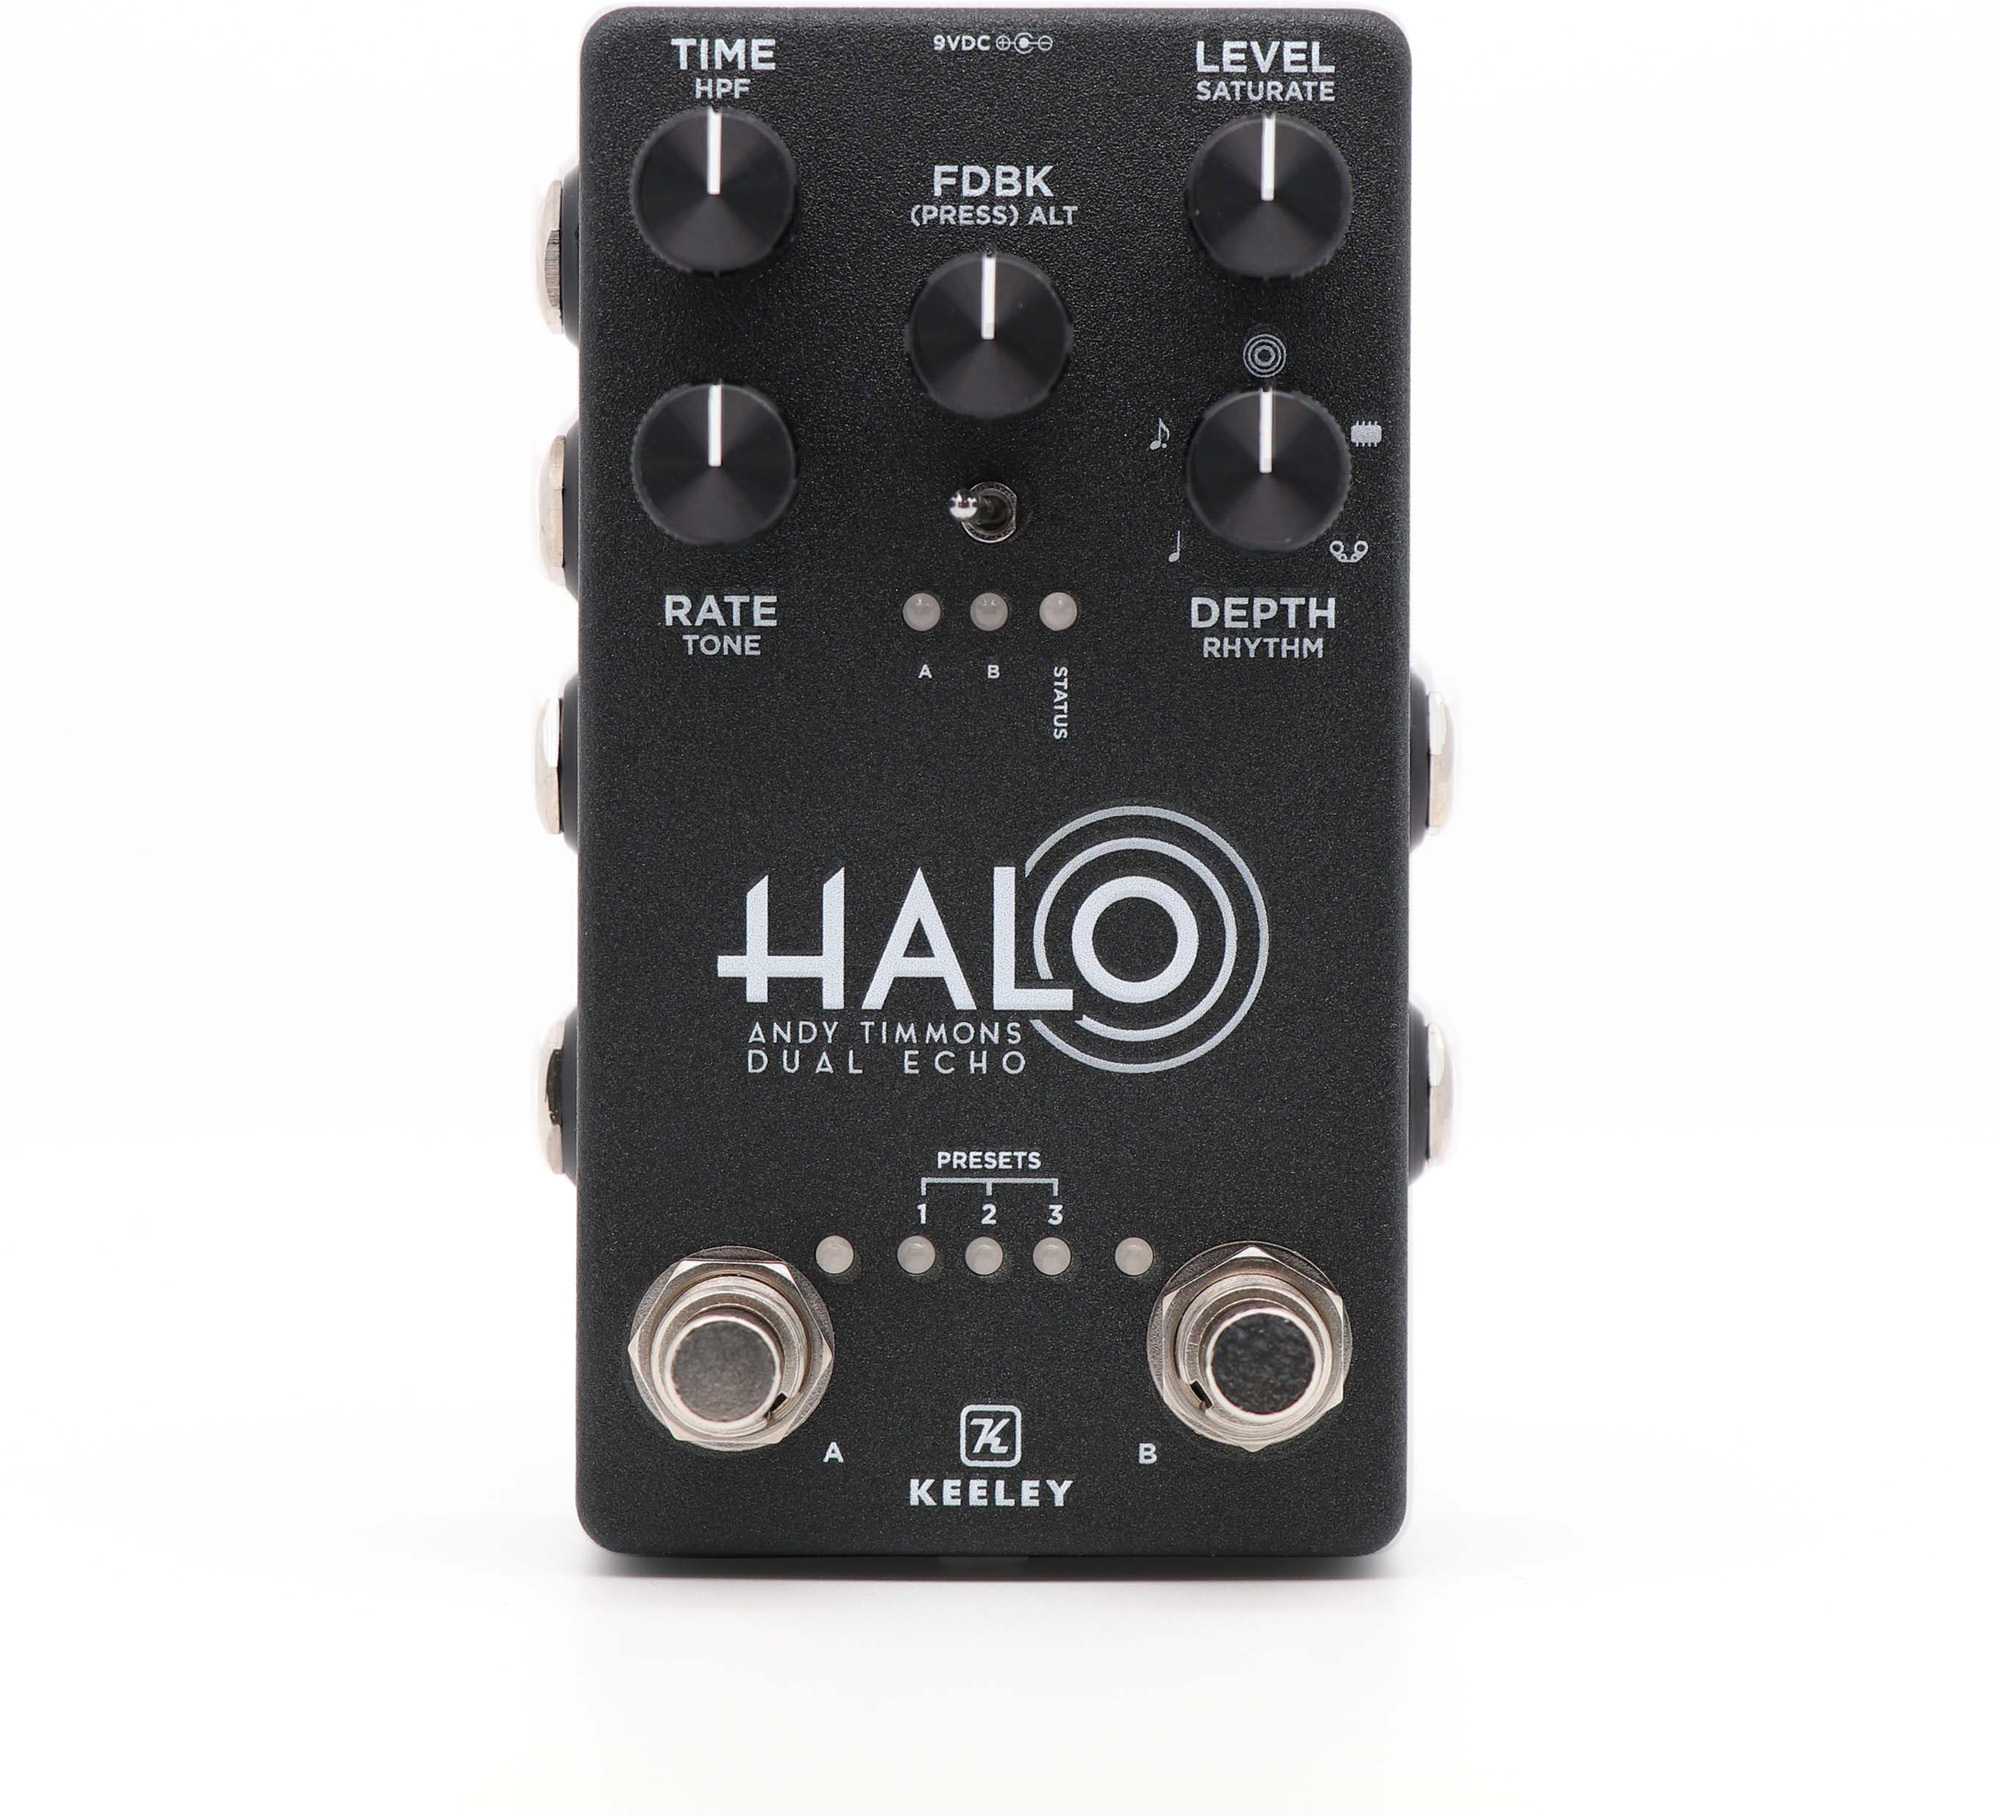 Keeley  Electronics Halo Dual Echo Andy Timmons Signature - Reverb, delay & echo effect pedal - Main picture